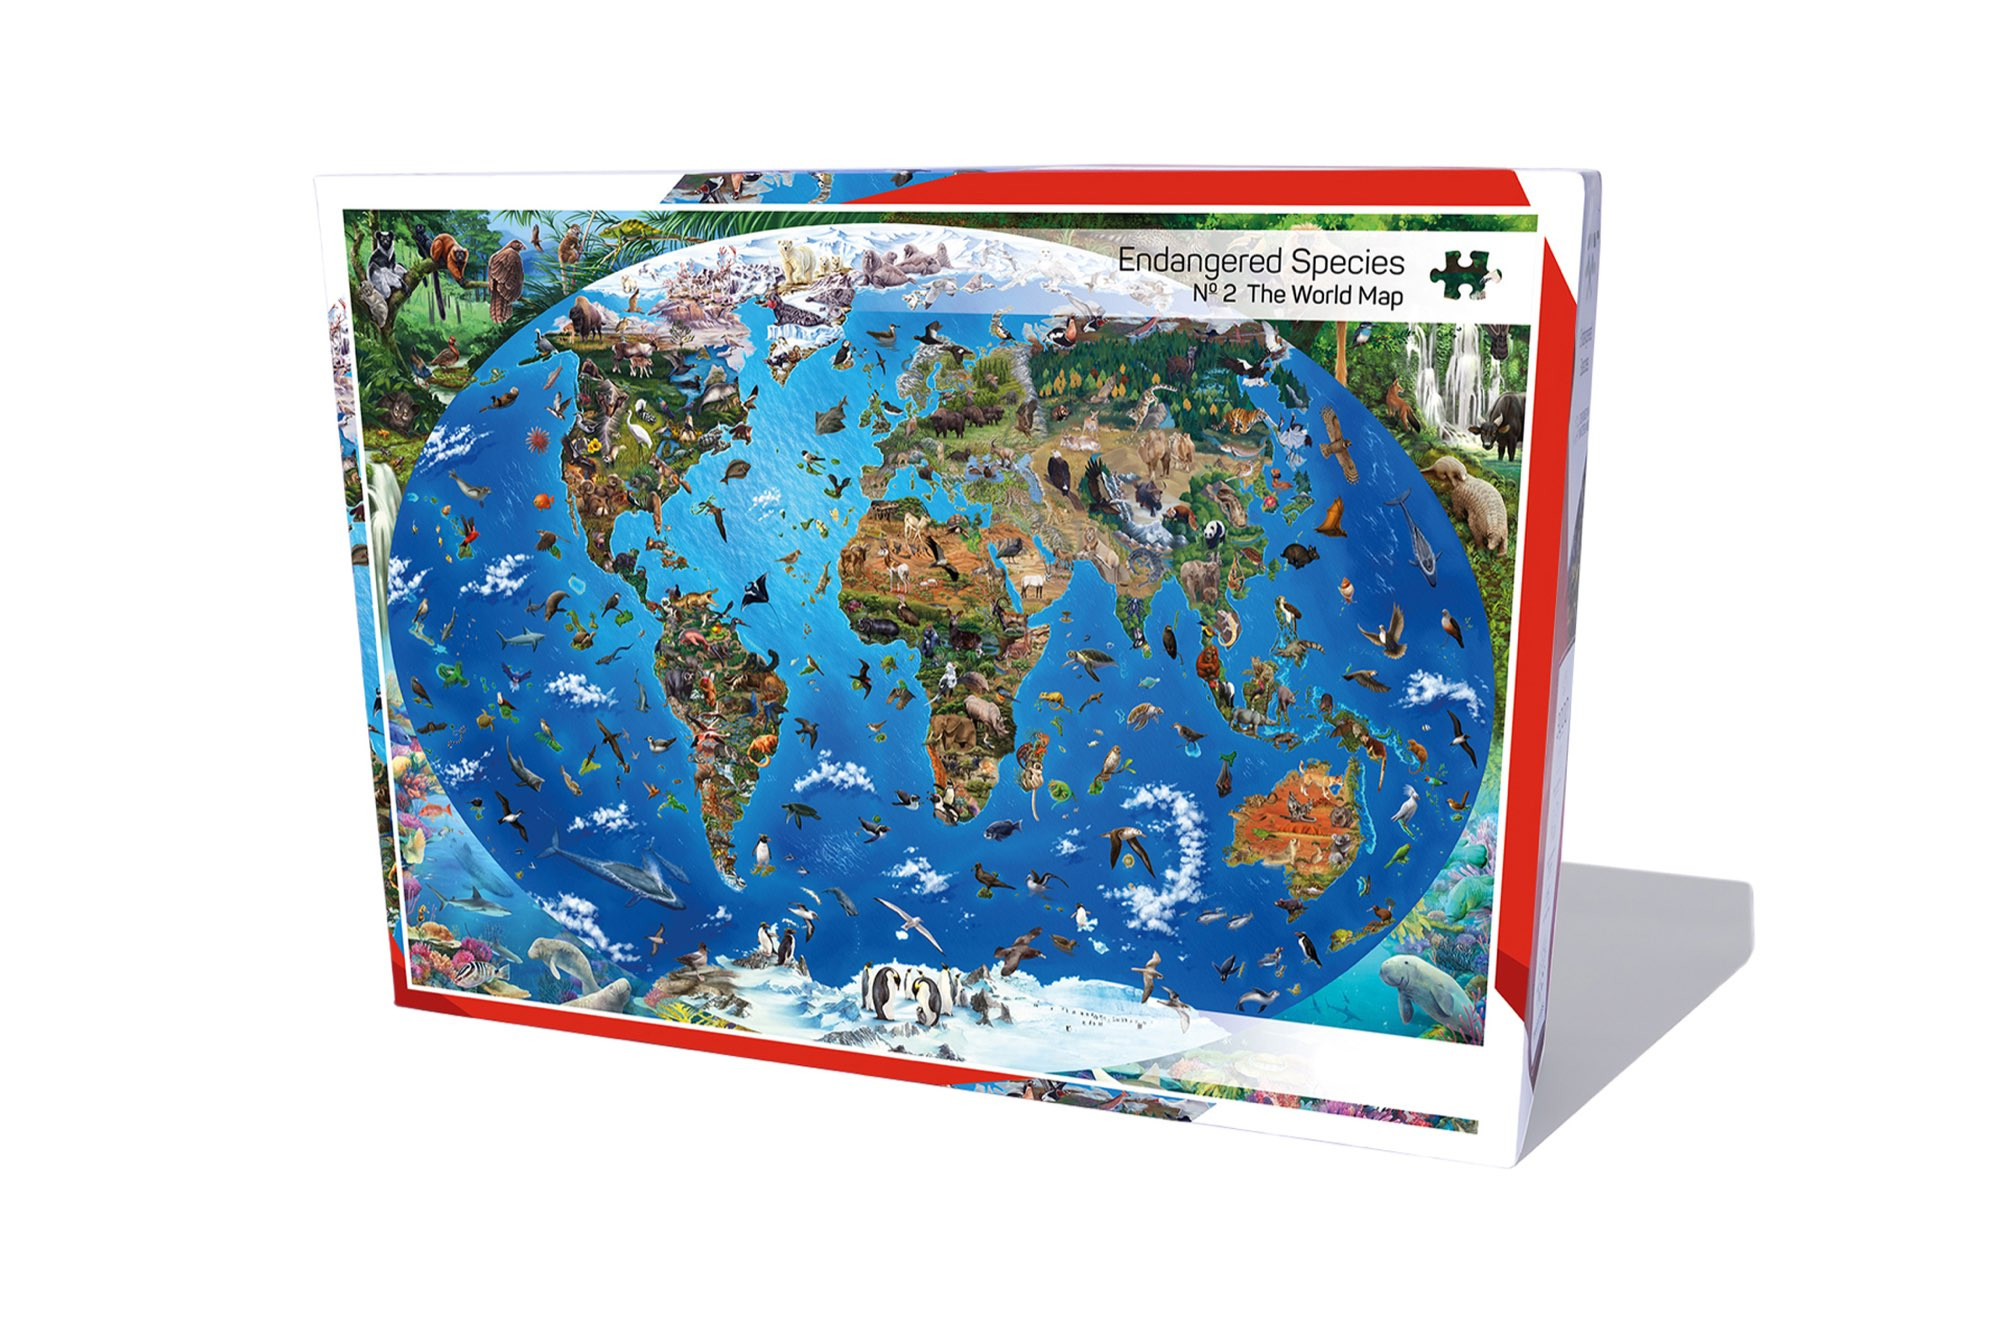 The Endangered Species Collection – Nr. 2 The World Map